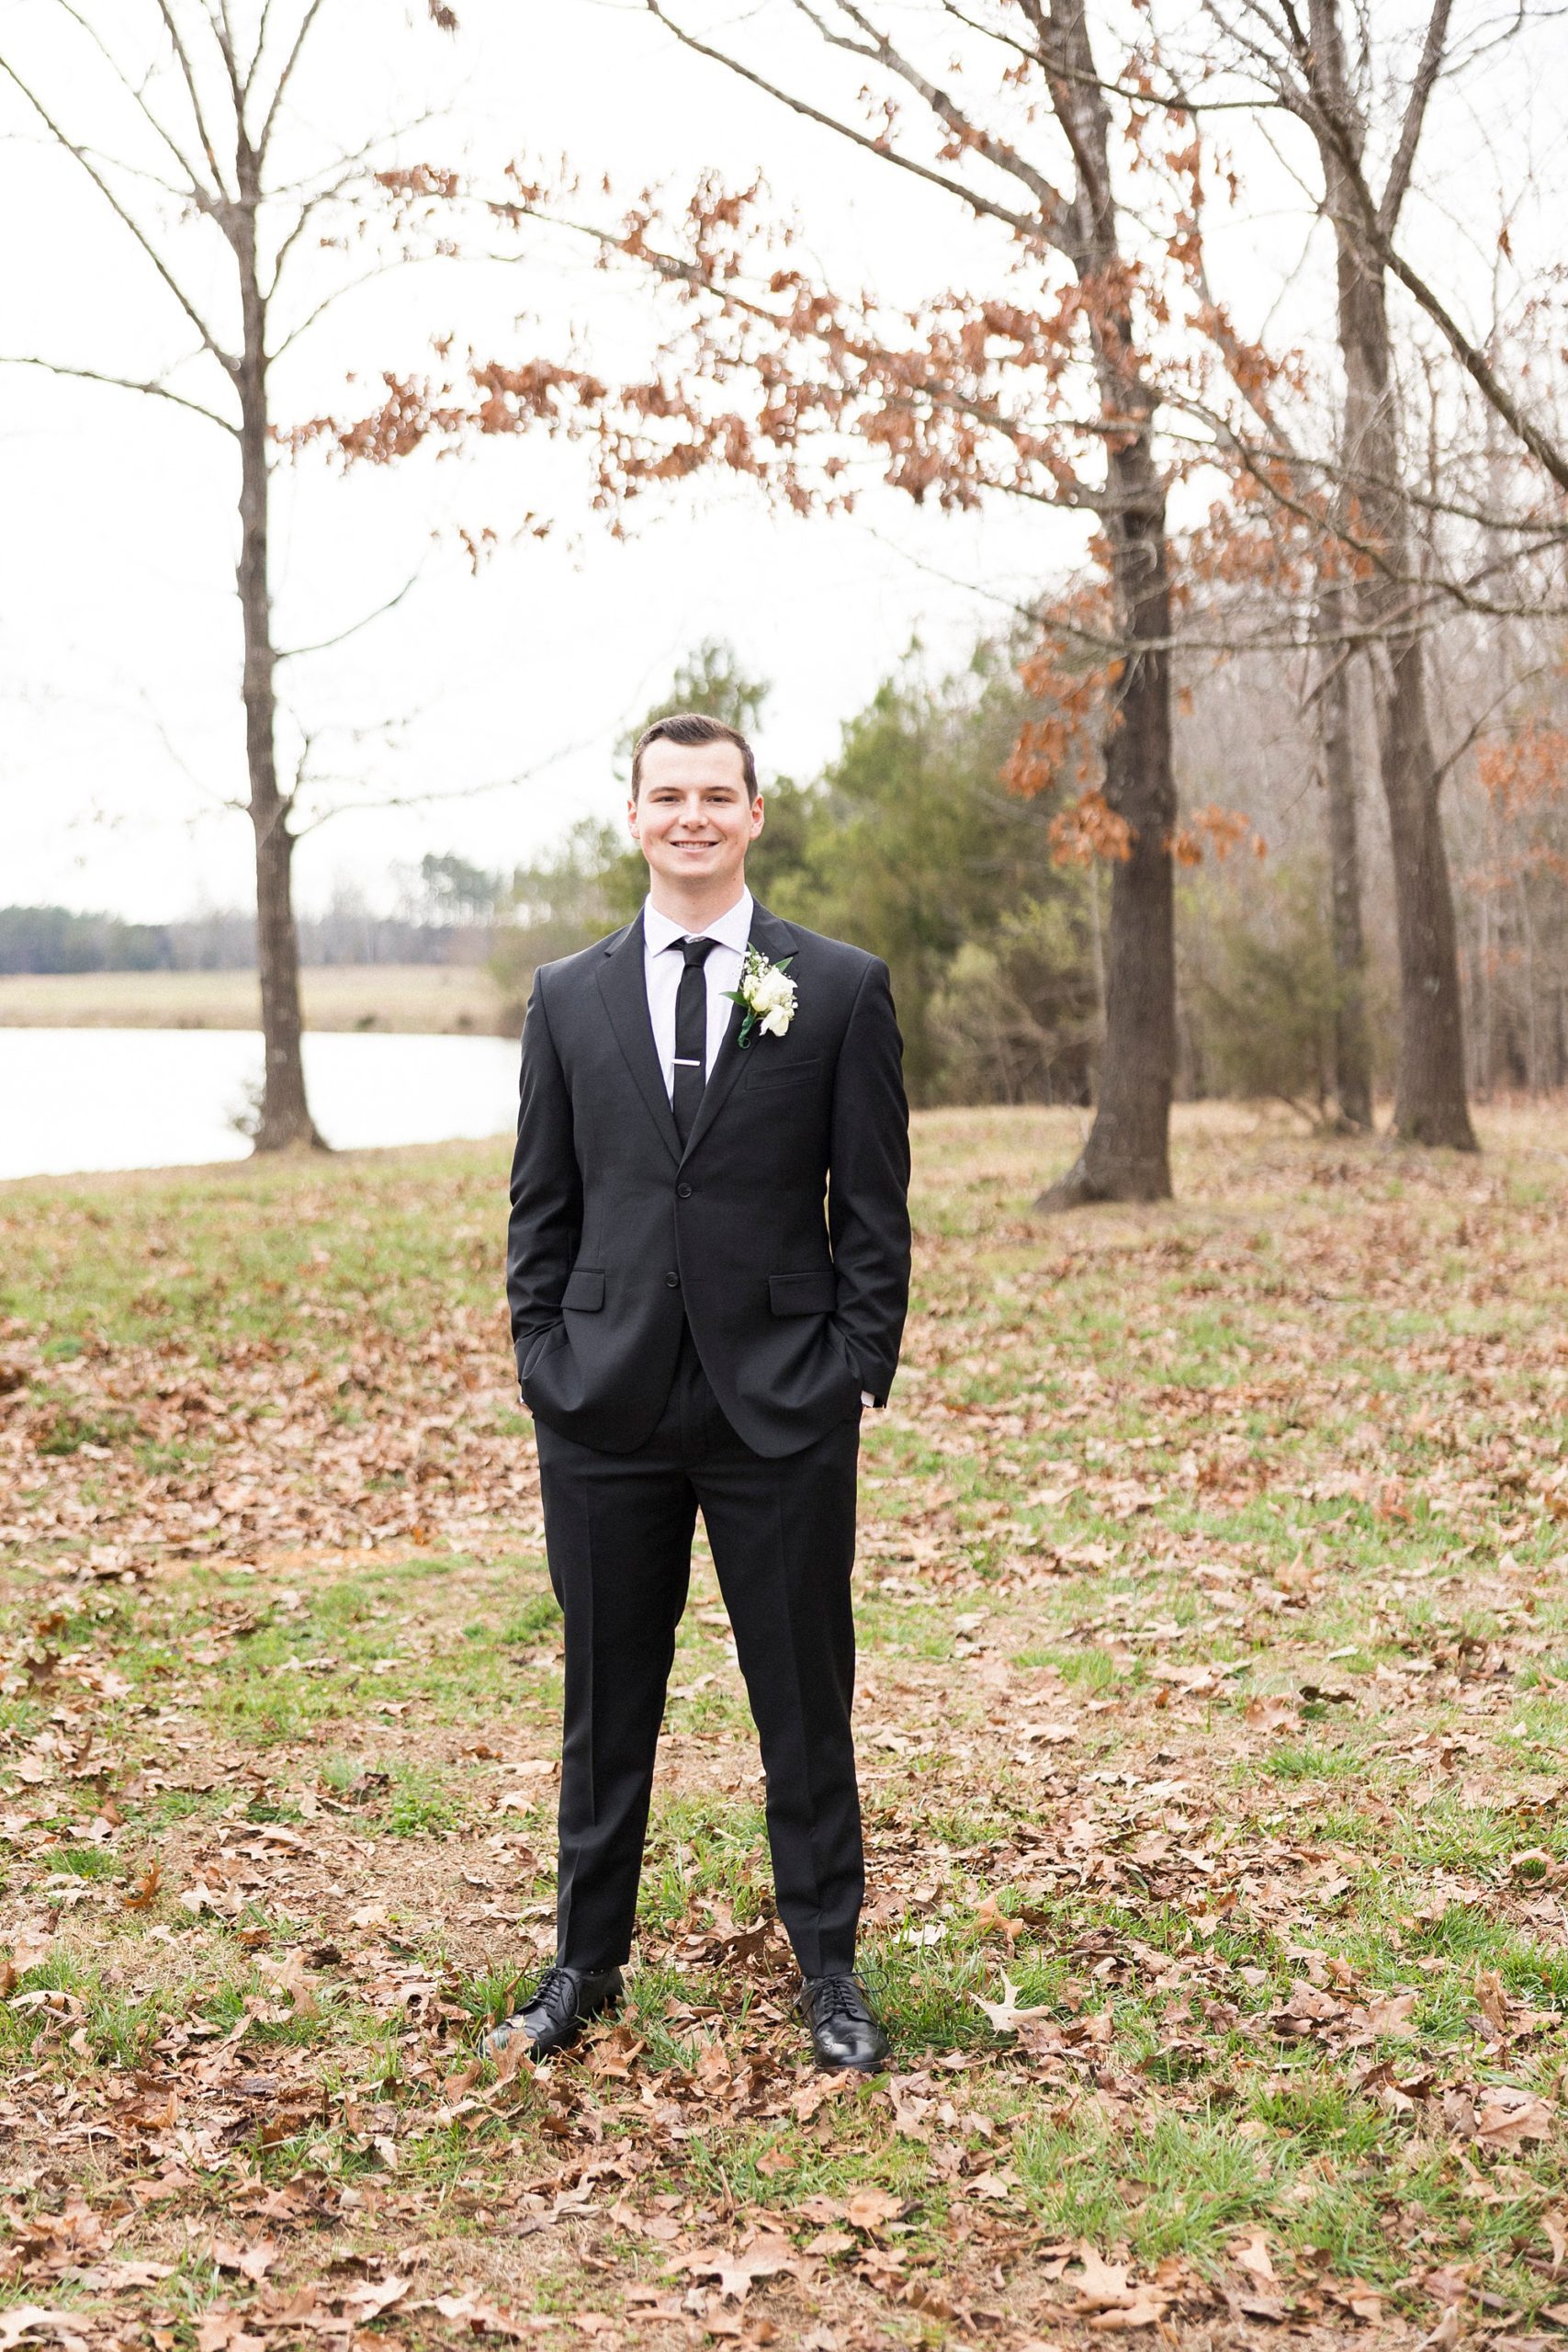 groom poses in black suit with white boutonnière